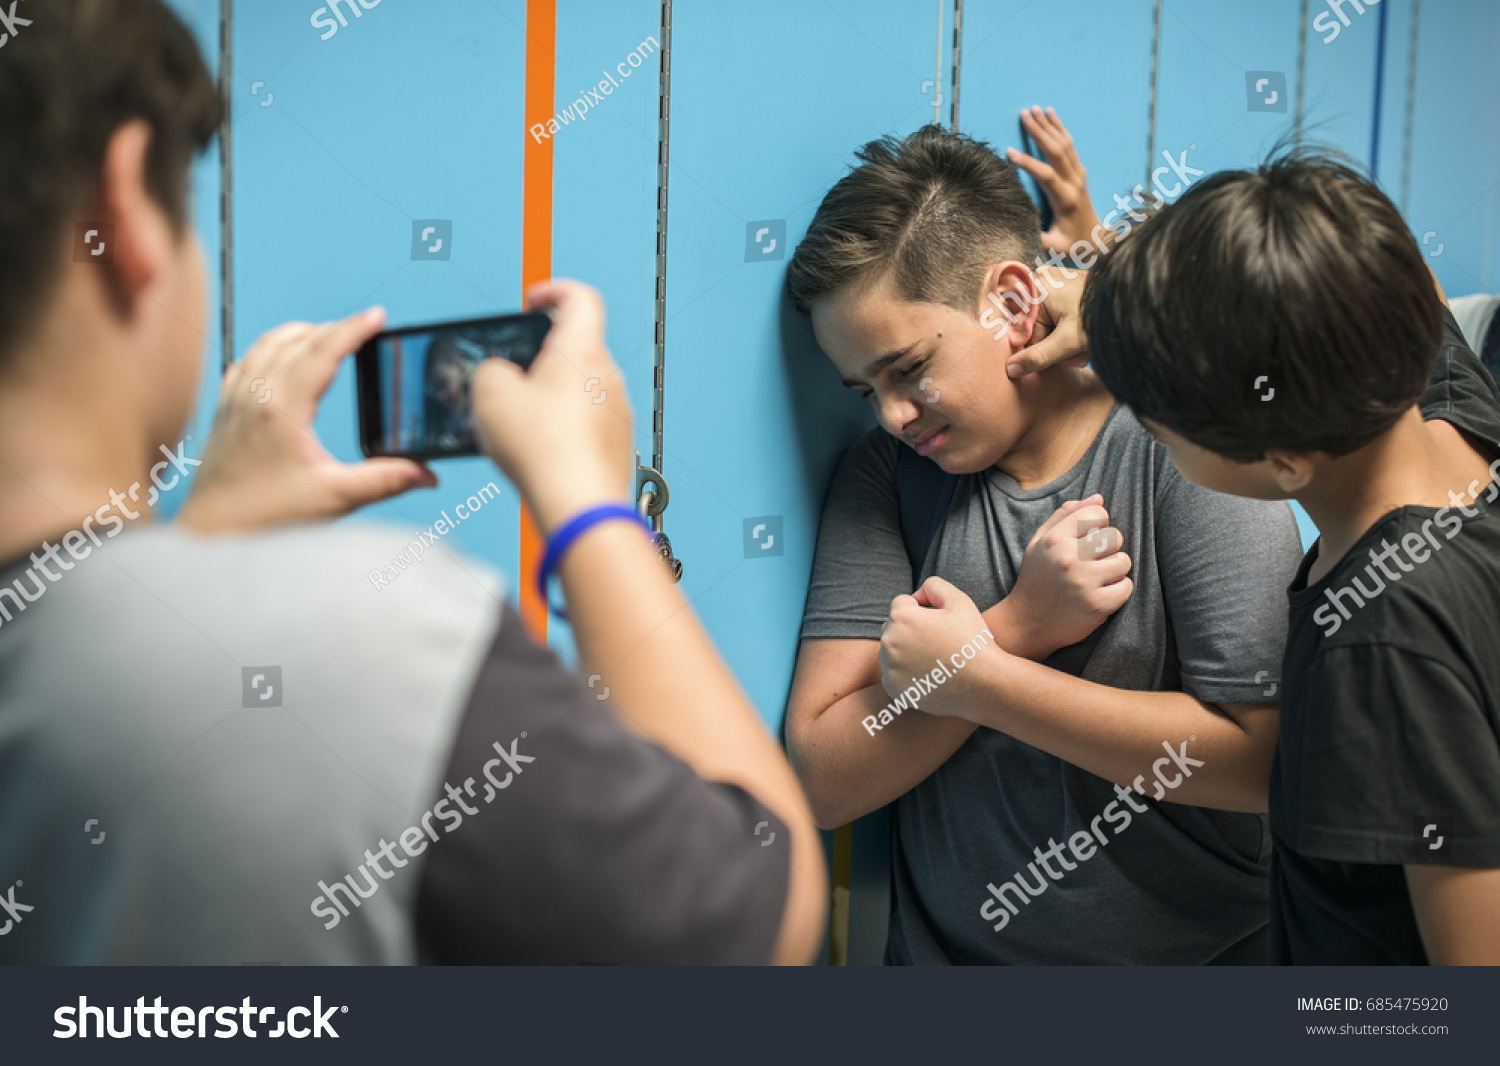 stock-photo-young-student-torturing-of-school-bullying-685475920